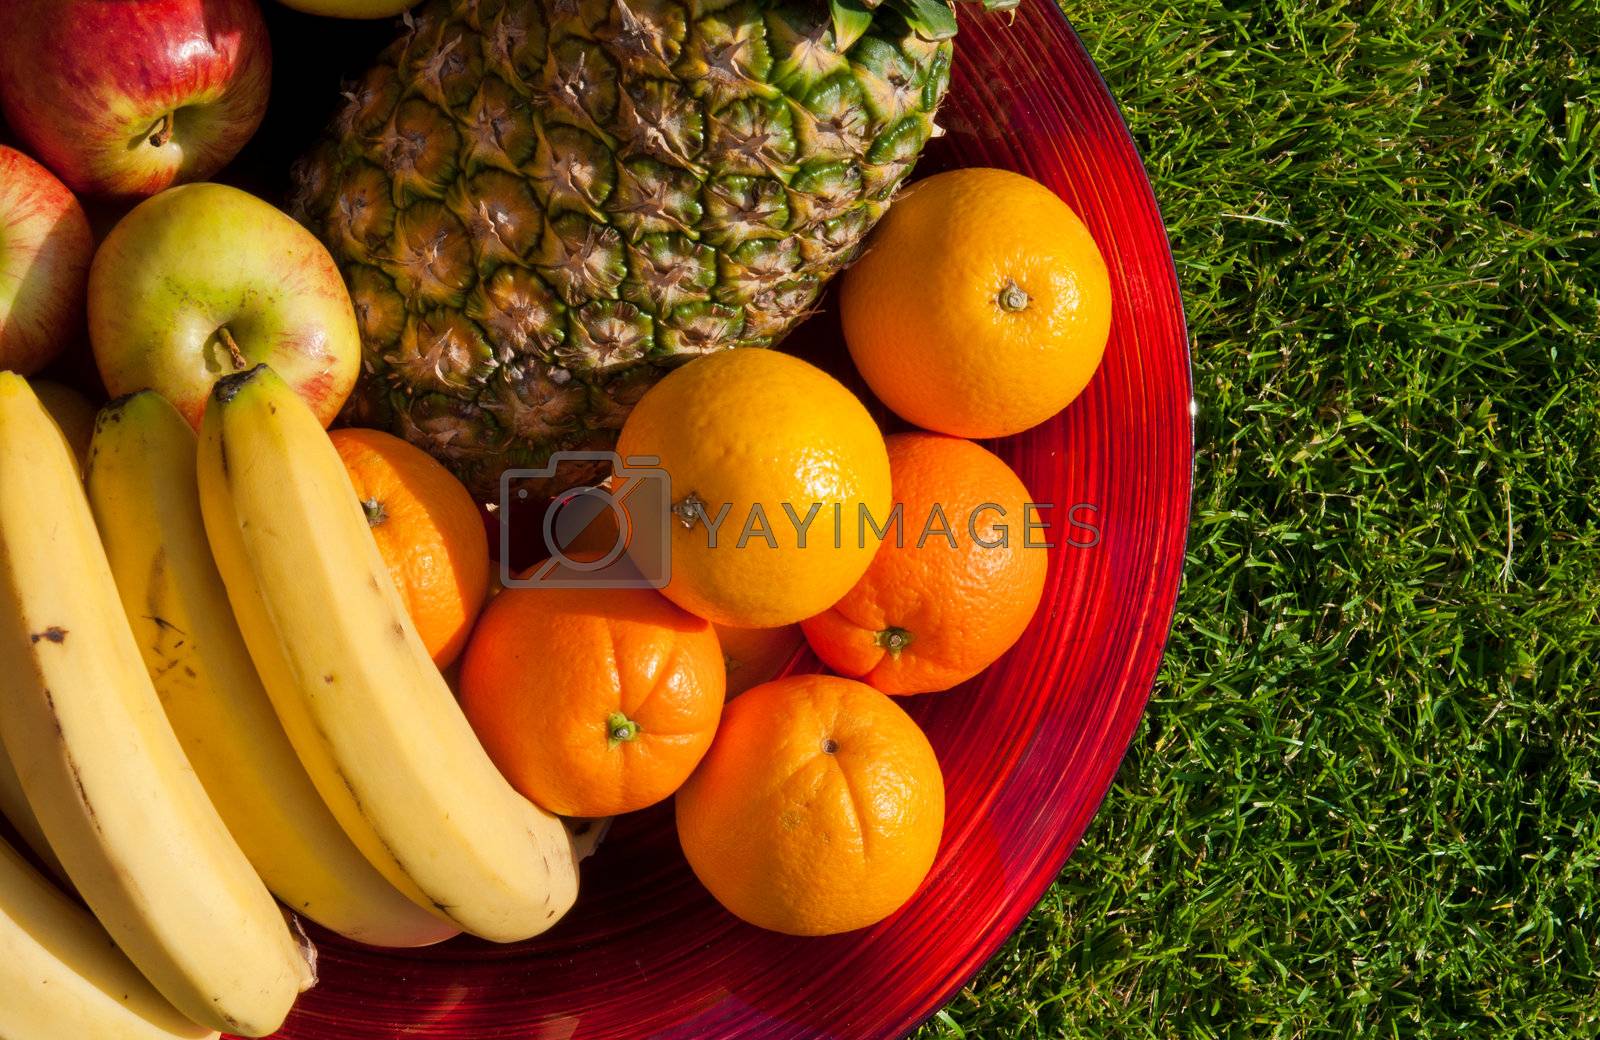 Royalty free image of Fruit bowl by luissantos84